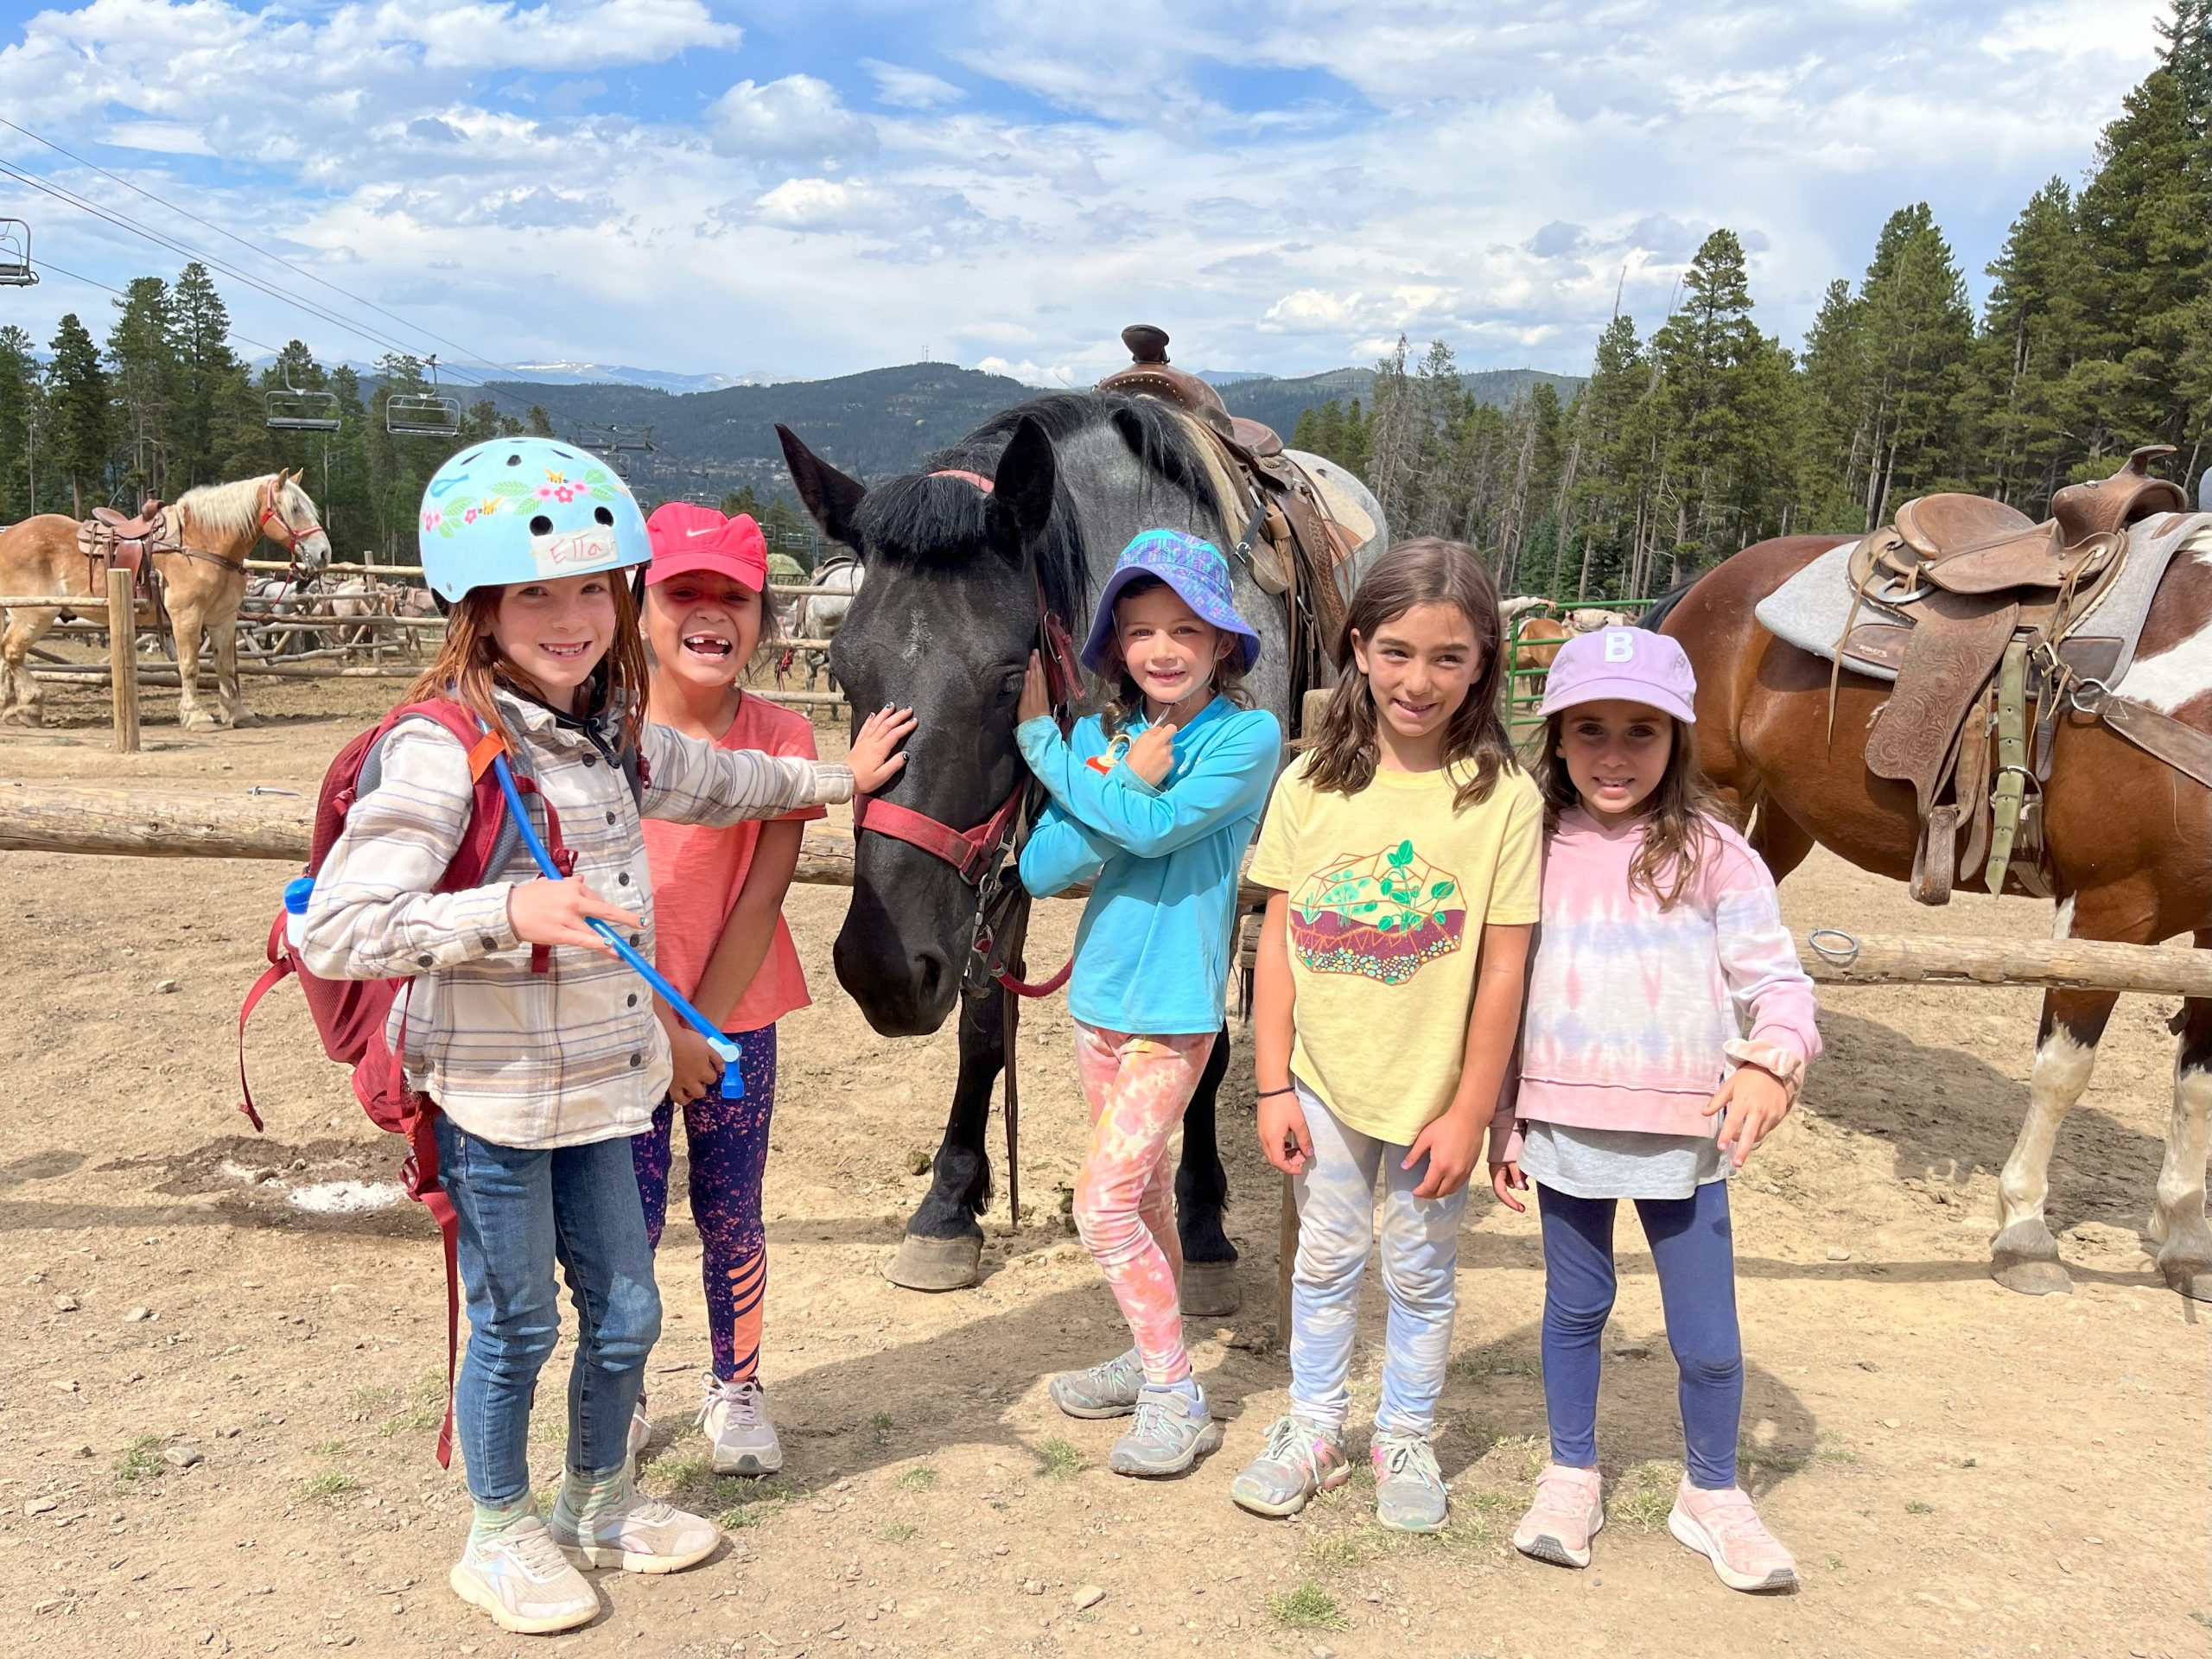 Children wearing helmets smiling while learning about horses and horse riding in Breckenridge